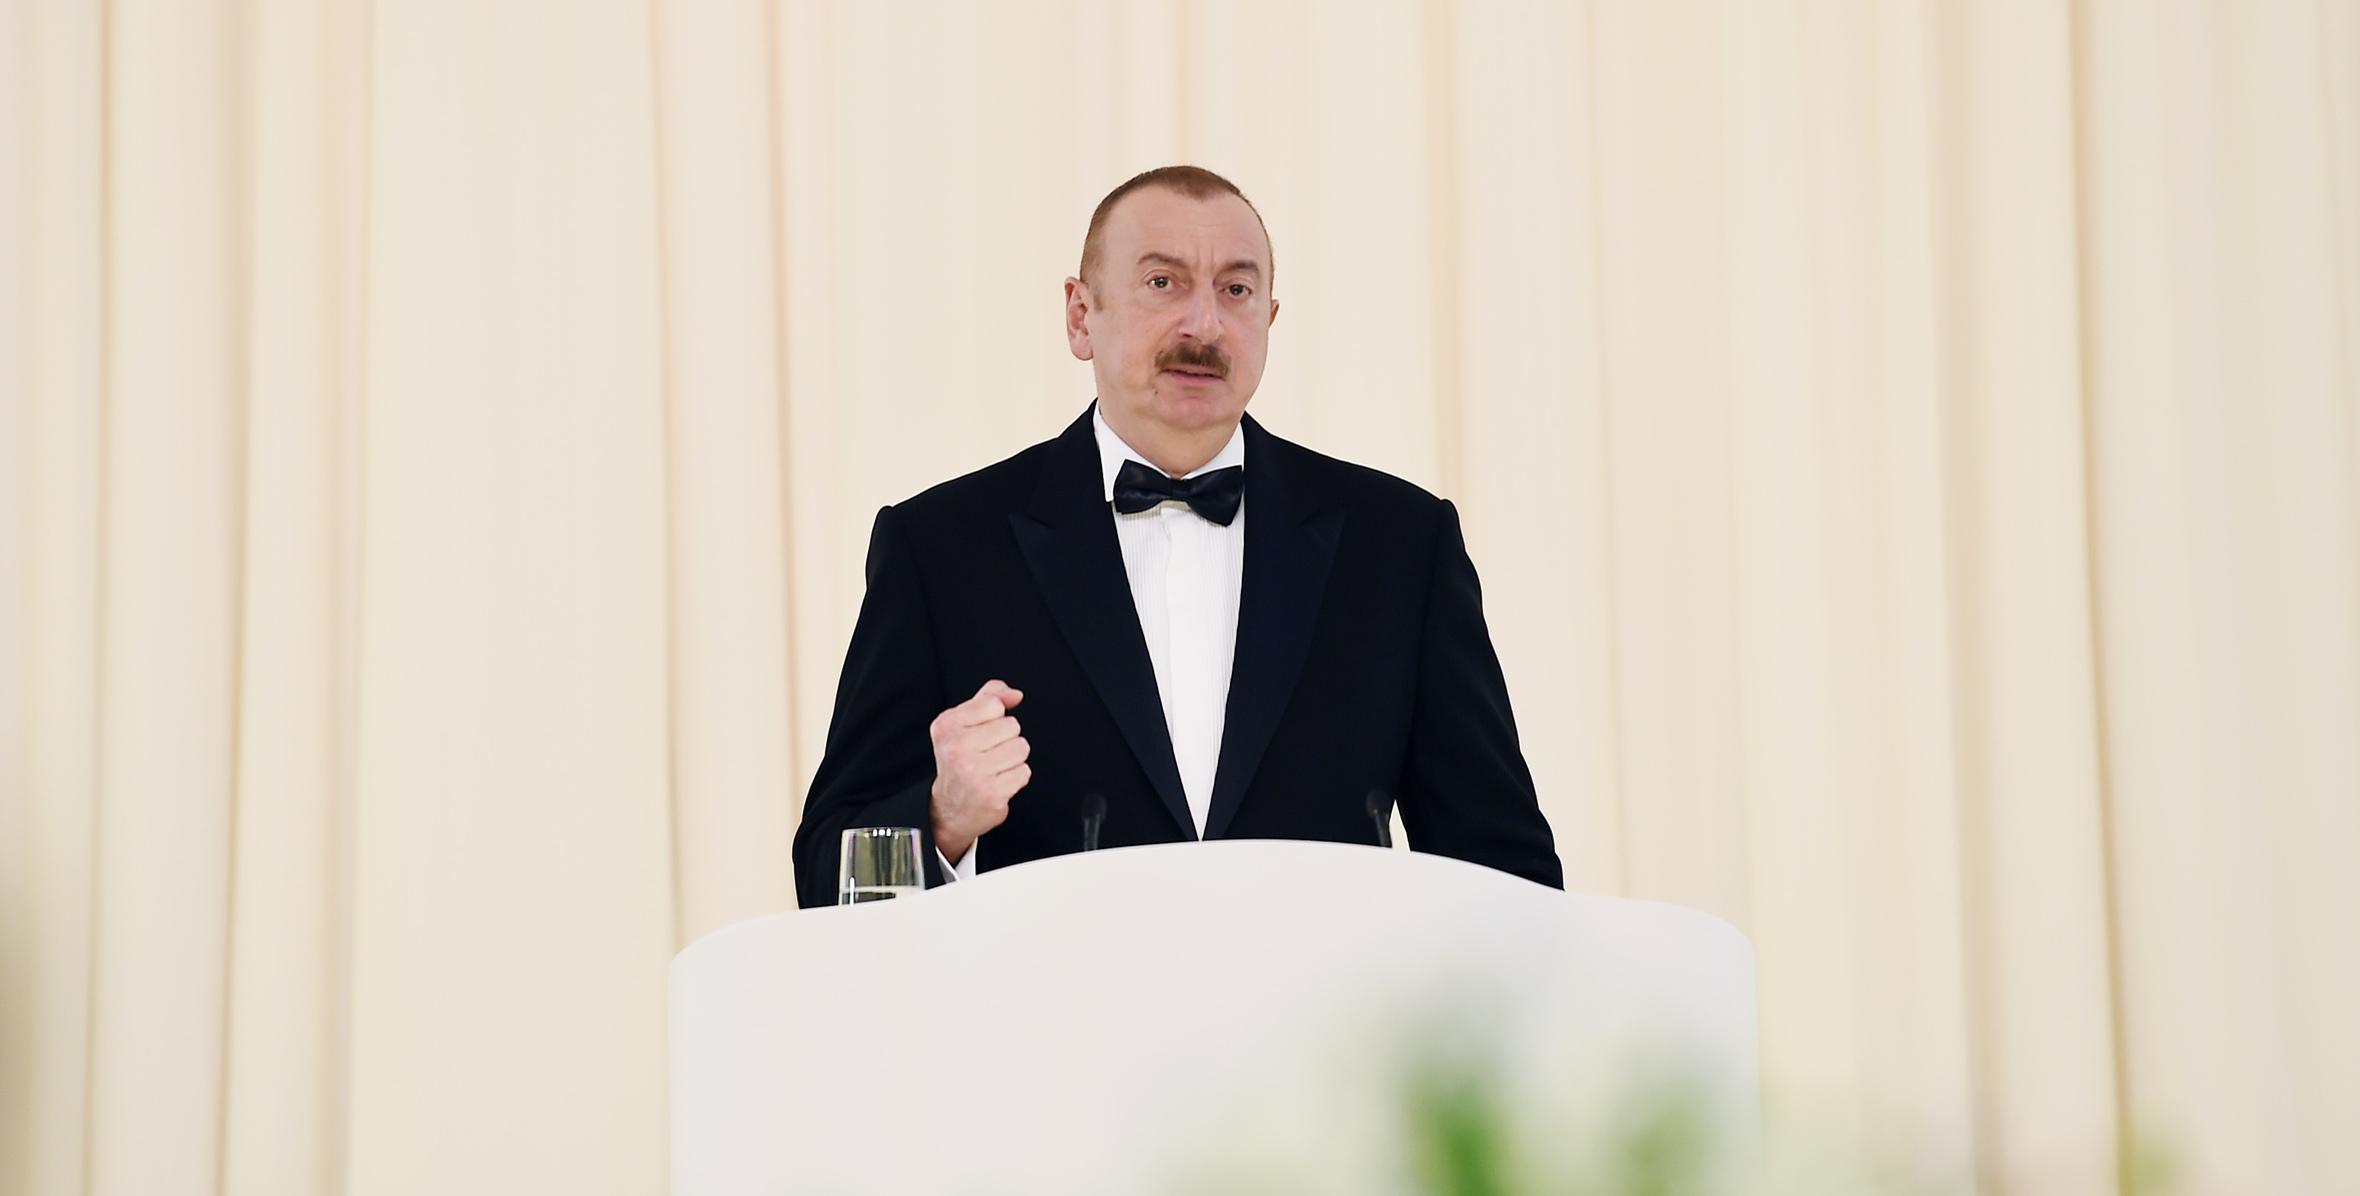 Speech by Ilham Aliyev at the solemn ceremony to mark 96th anniversary of national leader Heydar Aliyev and 15th anniversary of Heydar Aliyev Foundation